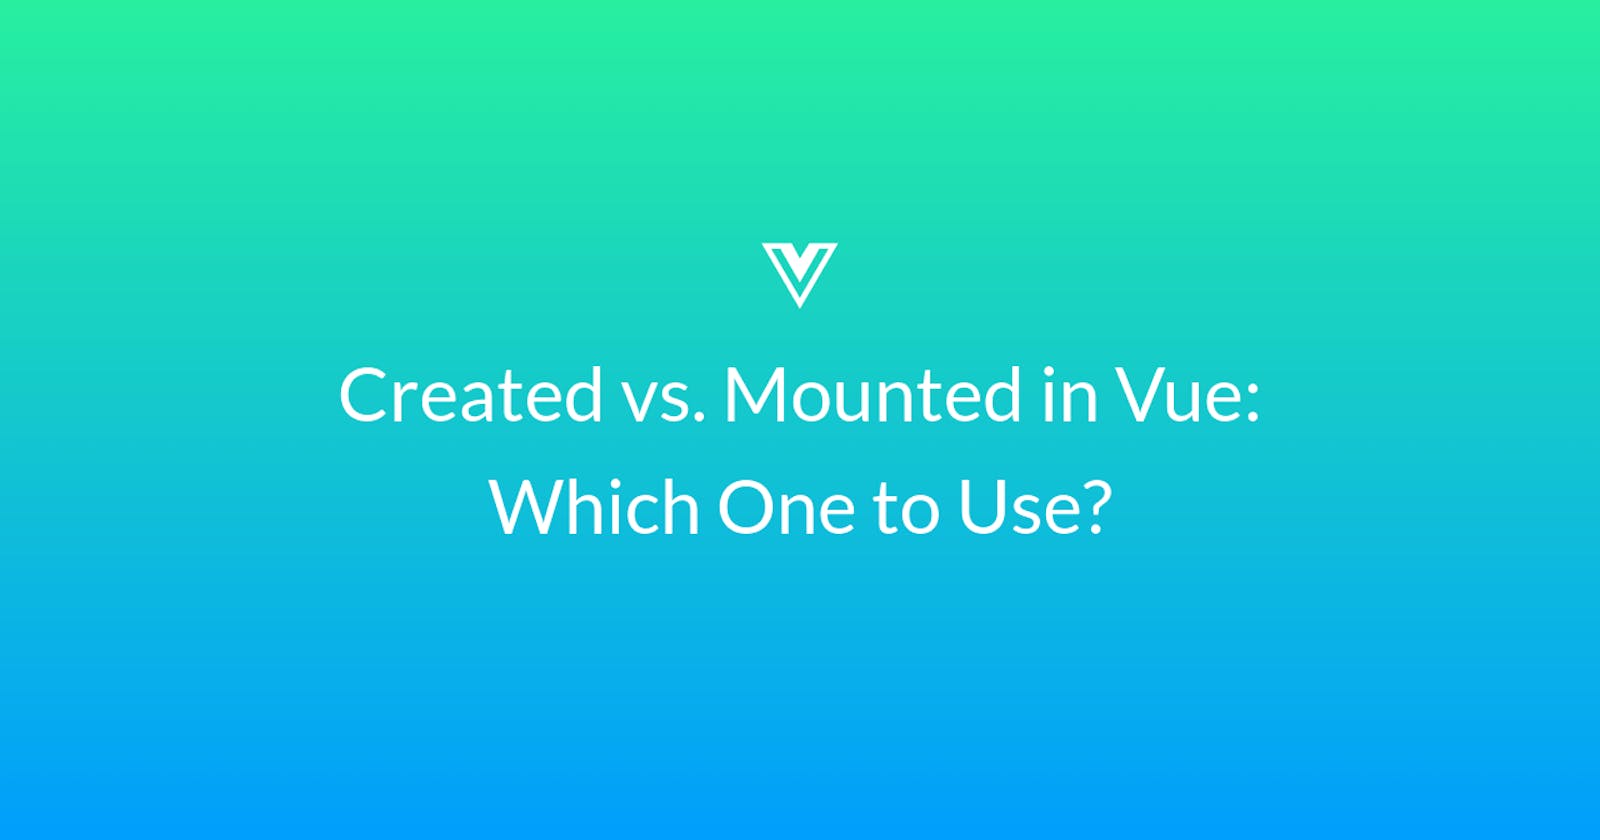 Created vs. Mounted in Vue: Which One to Use?